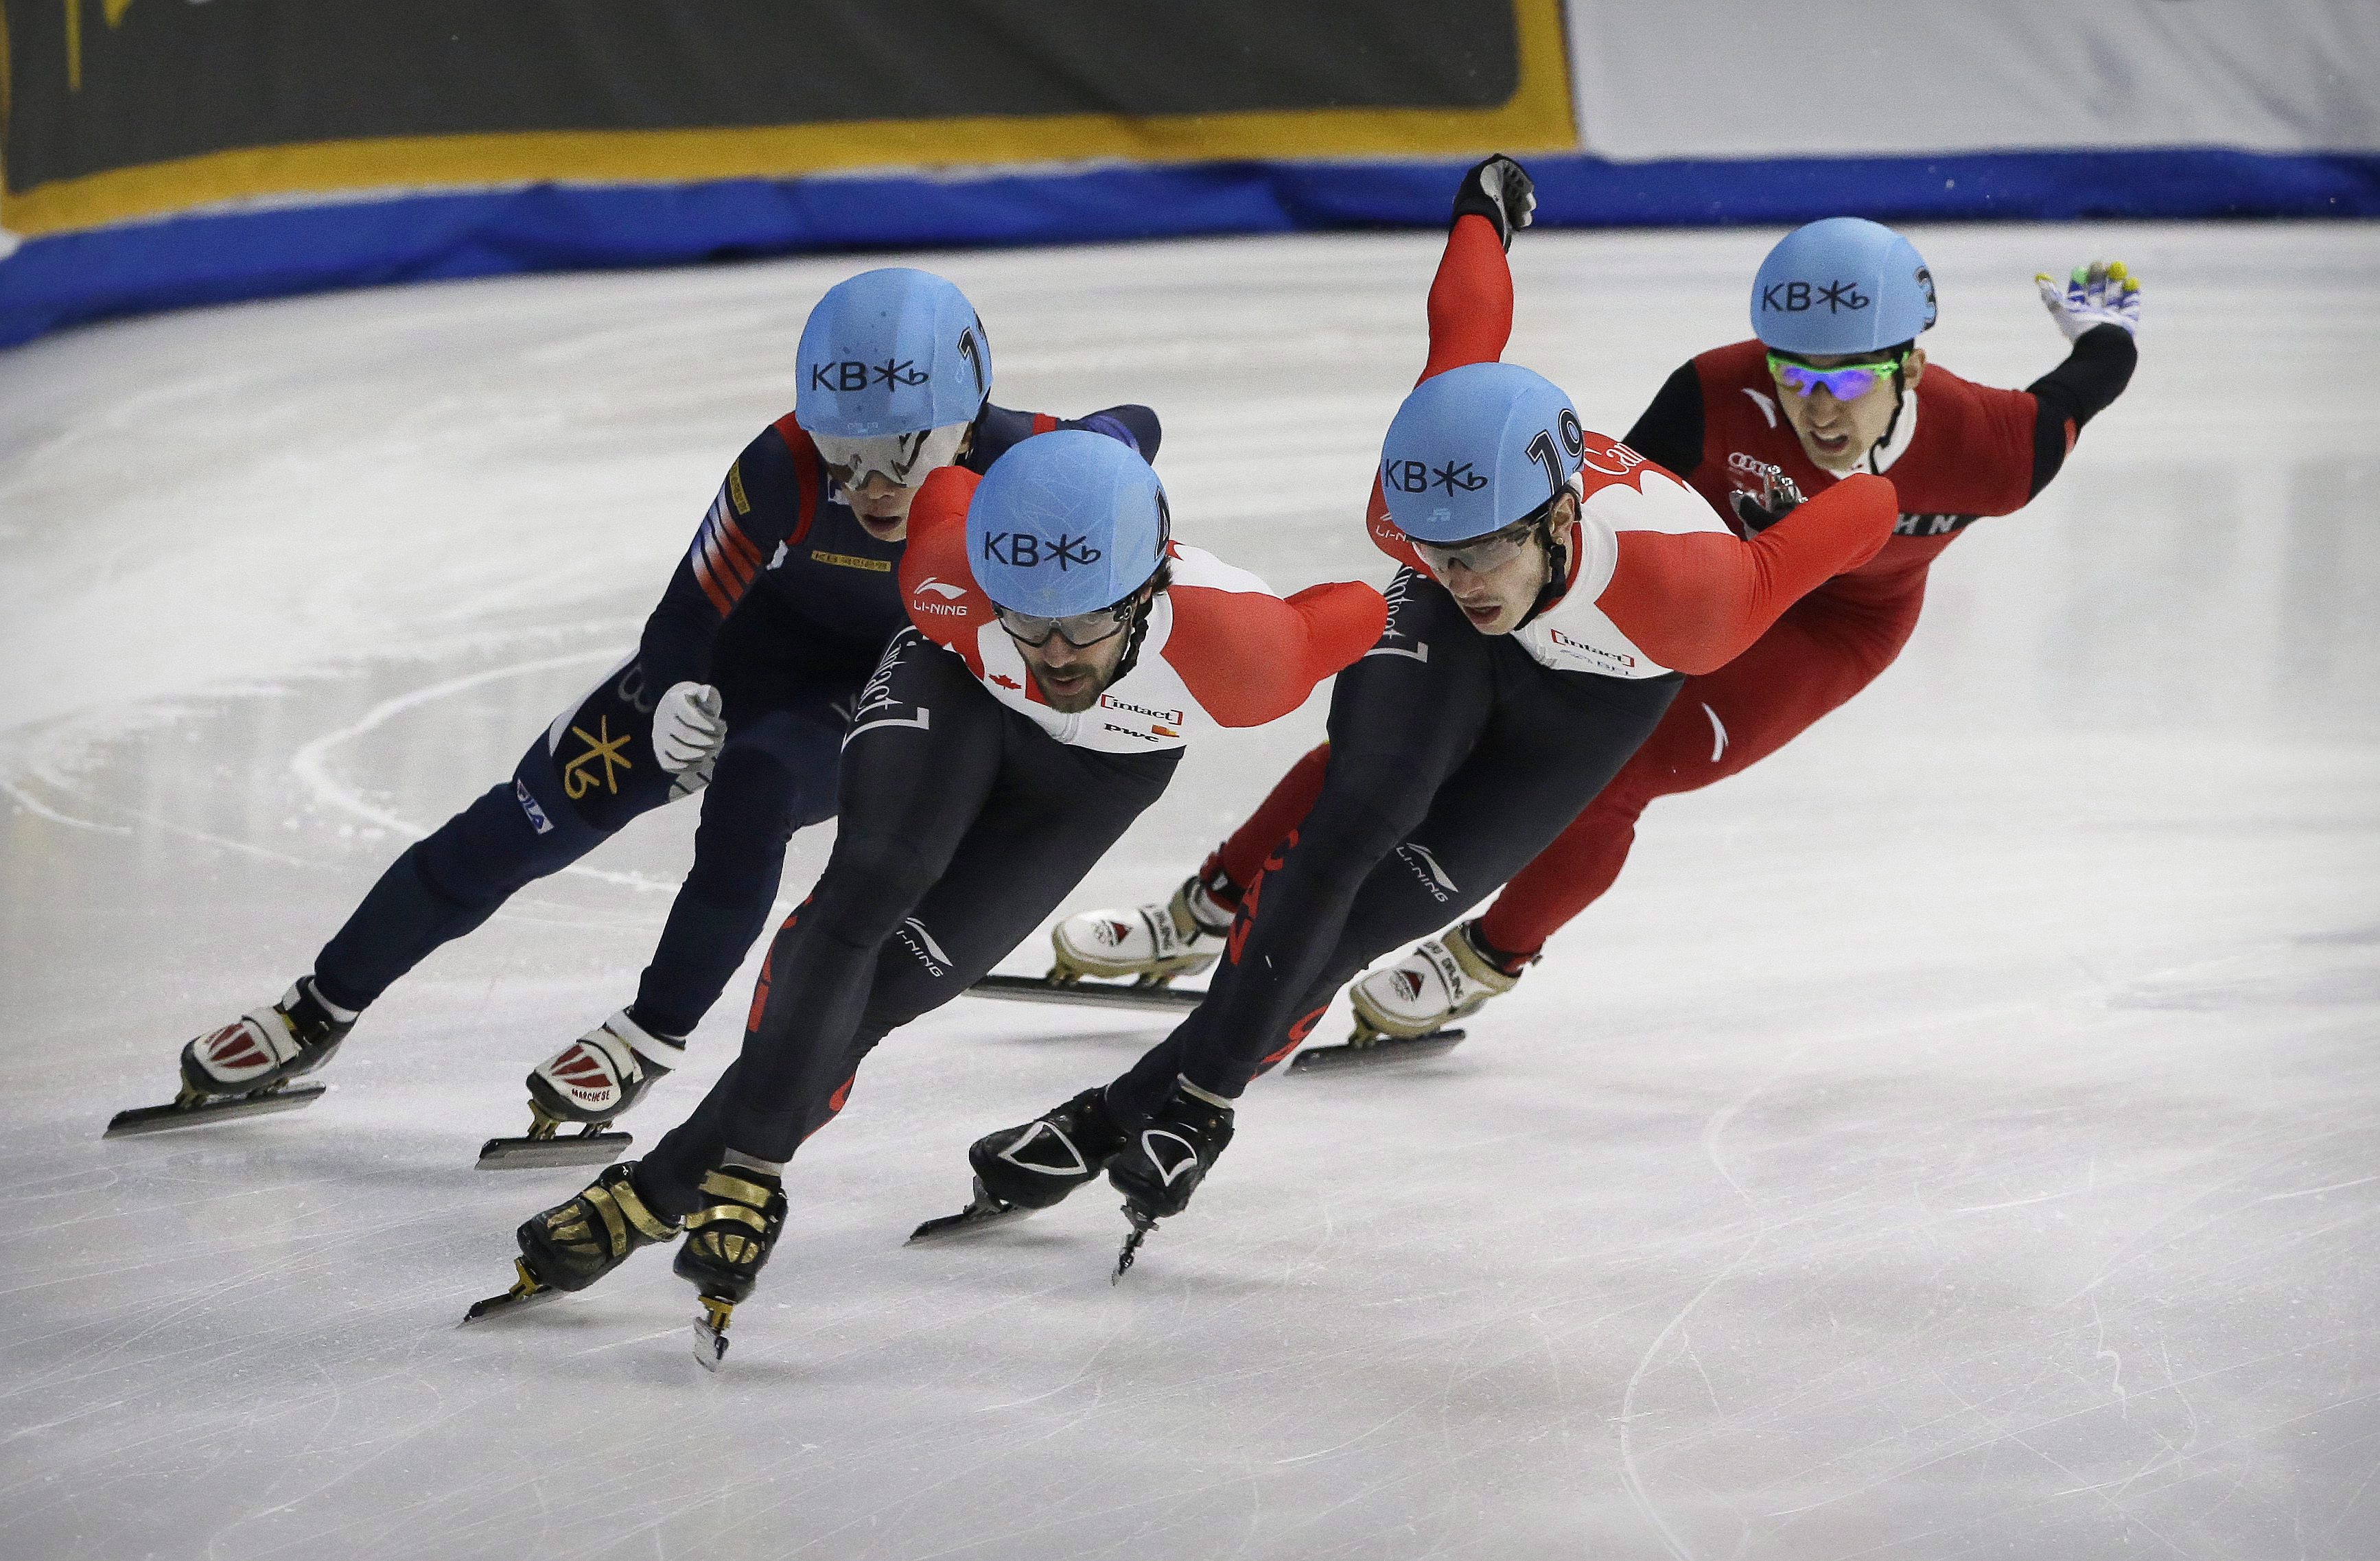 Charles Hamelin, second from left, of Canada, competes against Seo Yi Ra, left, of South Korea, Samuel Girard, second from right, of Canada and Wu Dajing, right, of China during the men's 1000 meter final race at the ISU World Cup Short Track Speed Skating competition in Seoul, South Korea, Sunday, March 13, 2016. Hamelin finished the race while Girard took second and Wu third. (AP Photo/Ahn Young-joon)